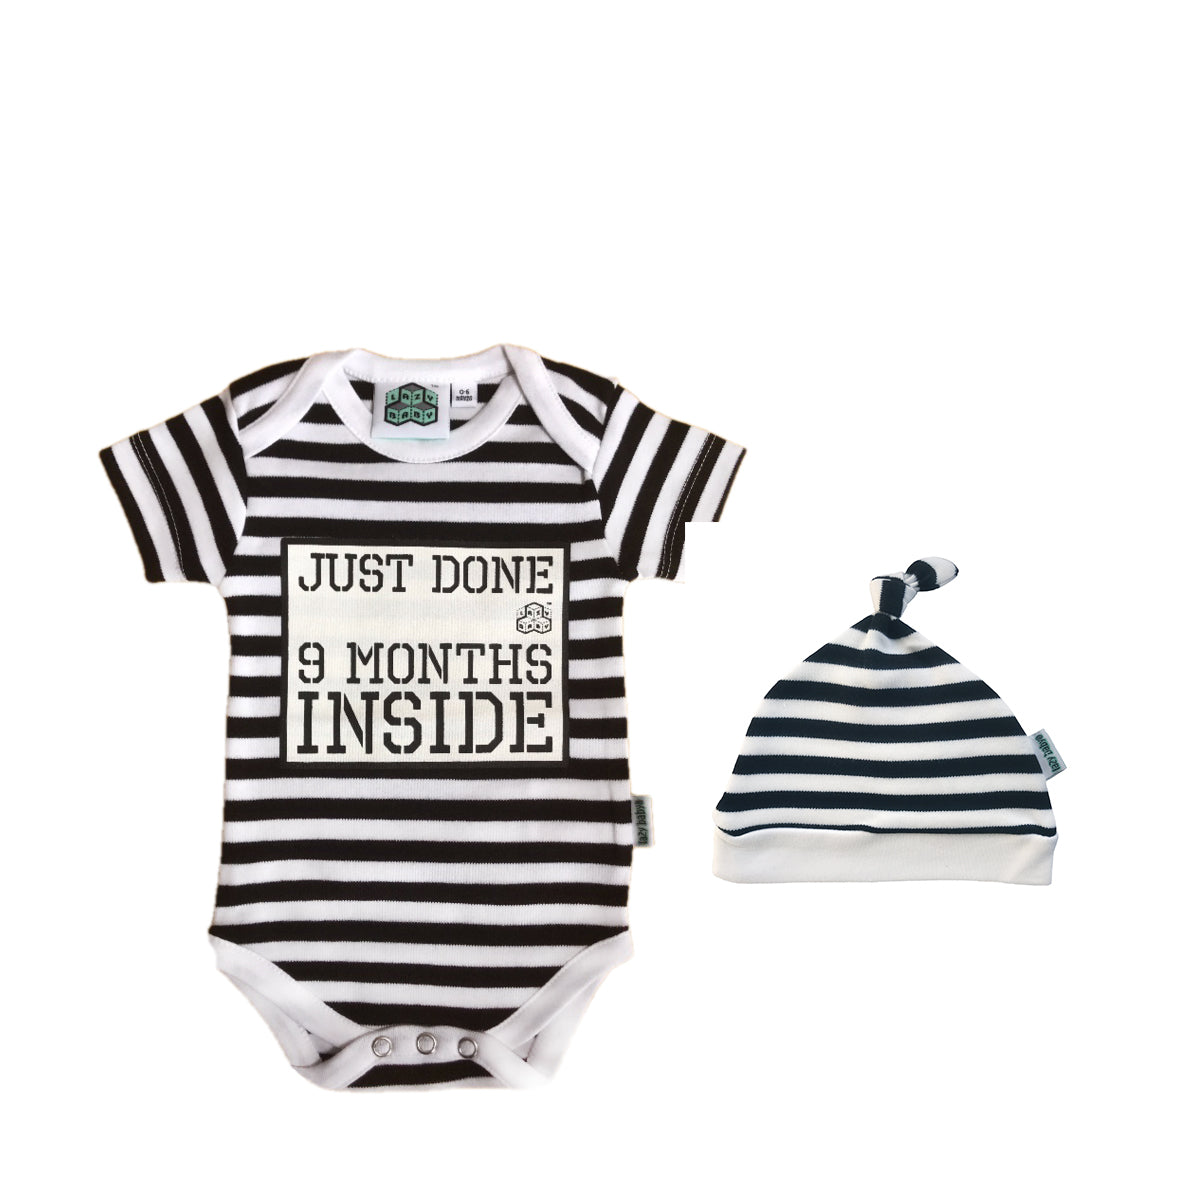 Just Done 9 Months Inside® Romper & Hat in black and white stripes